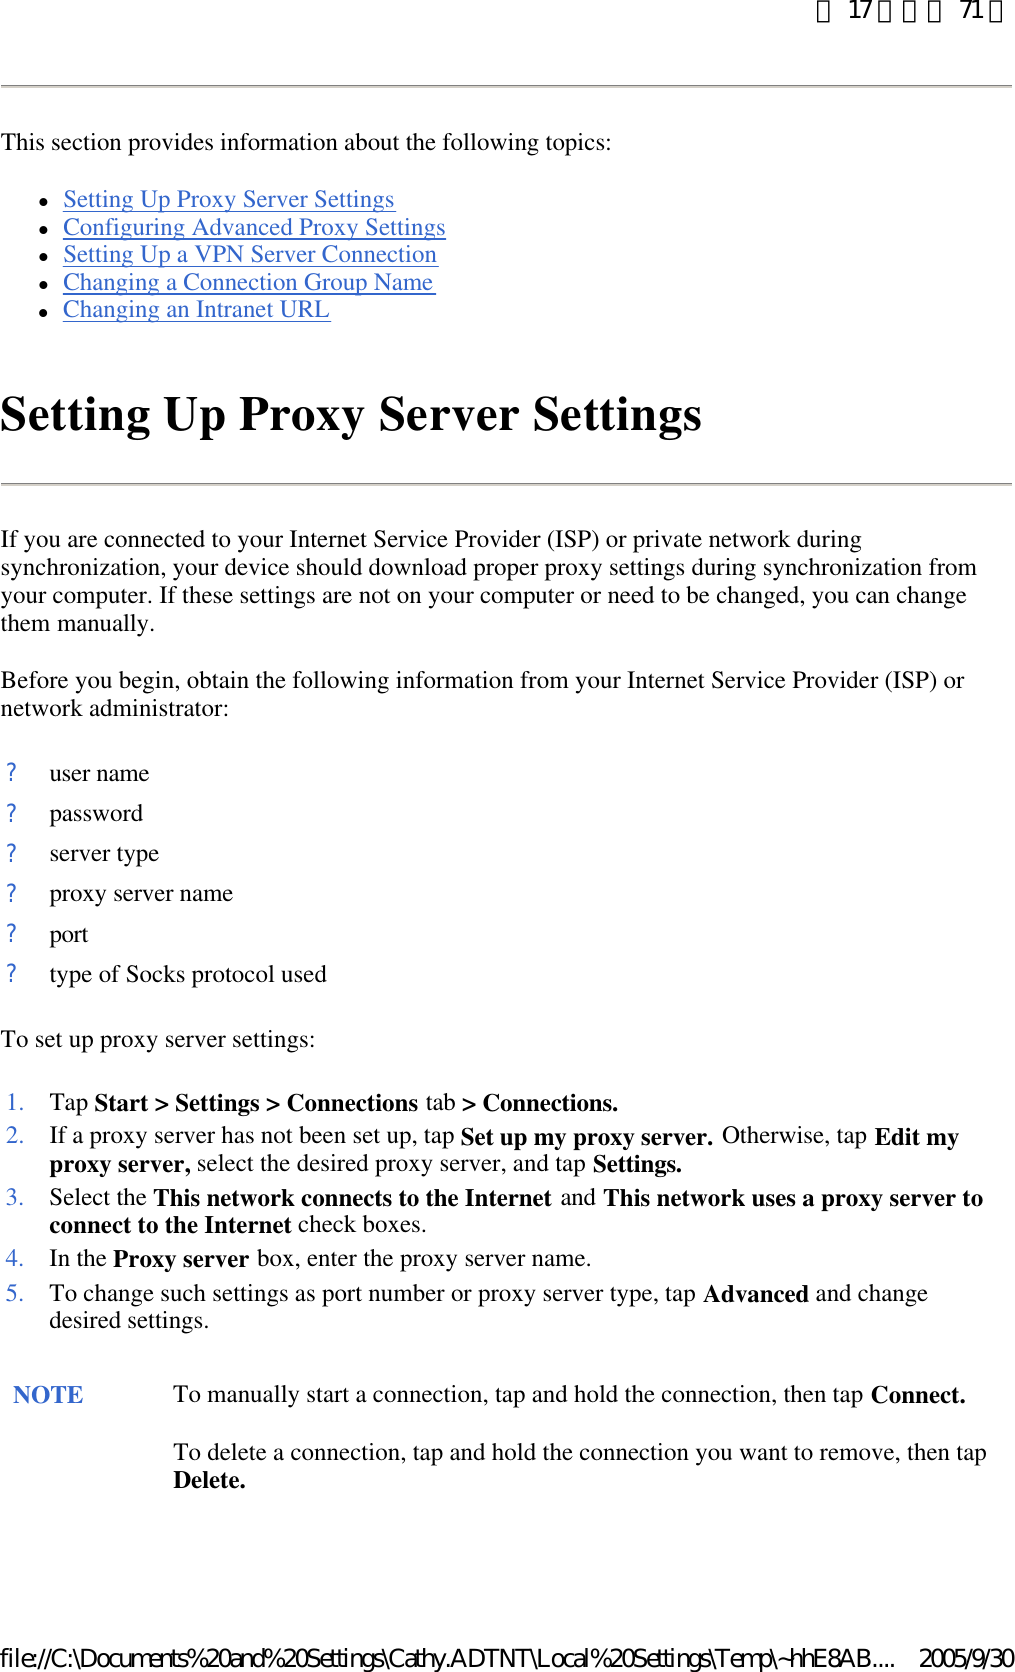 This section provides information about the following topics:  lSetting Up Proxy Server Settings  lConfiguring Advanced Proxy Settings  lSetting Up a VPN Server Connection  lChanging a Connection Group Name  lChanging an Intranet URL  Setting Up Proxy Server Settings If you are connected to your Internet Service Provider (ISP) or private network during synchronization, your device should download proper proxy settings during synchronization from your computer. If these settings are not on your computer or need to be changed, you can change them manually.  Before you begin, obtain the following information from your Internet Service Provider (ISP) or network administrator: To set up proxy server settings: ?user name?password?server type?proxy server name?port?type of Socks protocol used1. Tap Start &gt; Settings &gt; Connections tab &gt; Connections.2. If a proxy server has not been set up, tap Set up my proxy server. Otherwise, tap Edit my proxy server, select the desired proxy server, and tap Settings.3. Select the This network connects to the Internet and This network uses a proxy server to connect to the Internet check boxes. 4. In the Proxy server box, enter the proxy server name. 5. To change such settings as port number or proxy server type, tap Advanced and change desired settings. NOTE To manually start a connection, tap and hold the connection, then tap Connect. To delete a connection, tap and hold the connection you want to remove, then tap Delete. 第 17 頁，共 71 頁2005/9/30file://C:\Documents%20and%20Settings\Cathy.ADTNT\Local%20Settings\Temp\~hhE8AB....